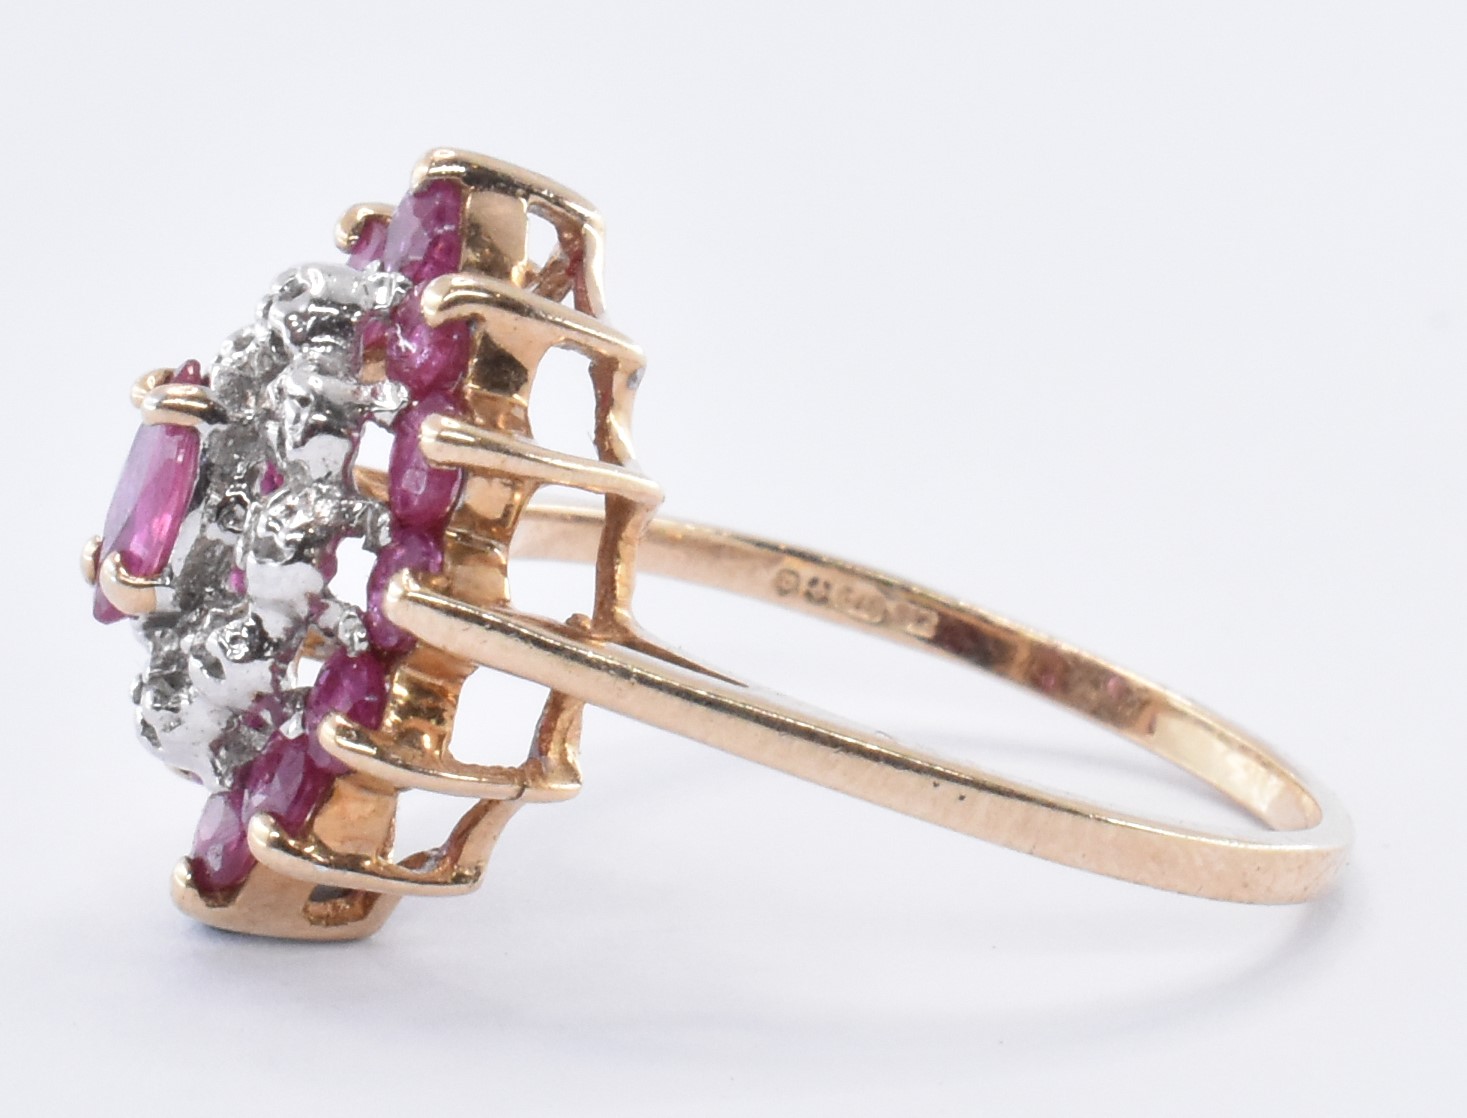 9CT GOLD CLUSTER RING WITH RUBIES AND DIAMONDS - Image 4 of 7